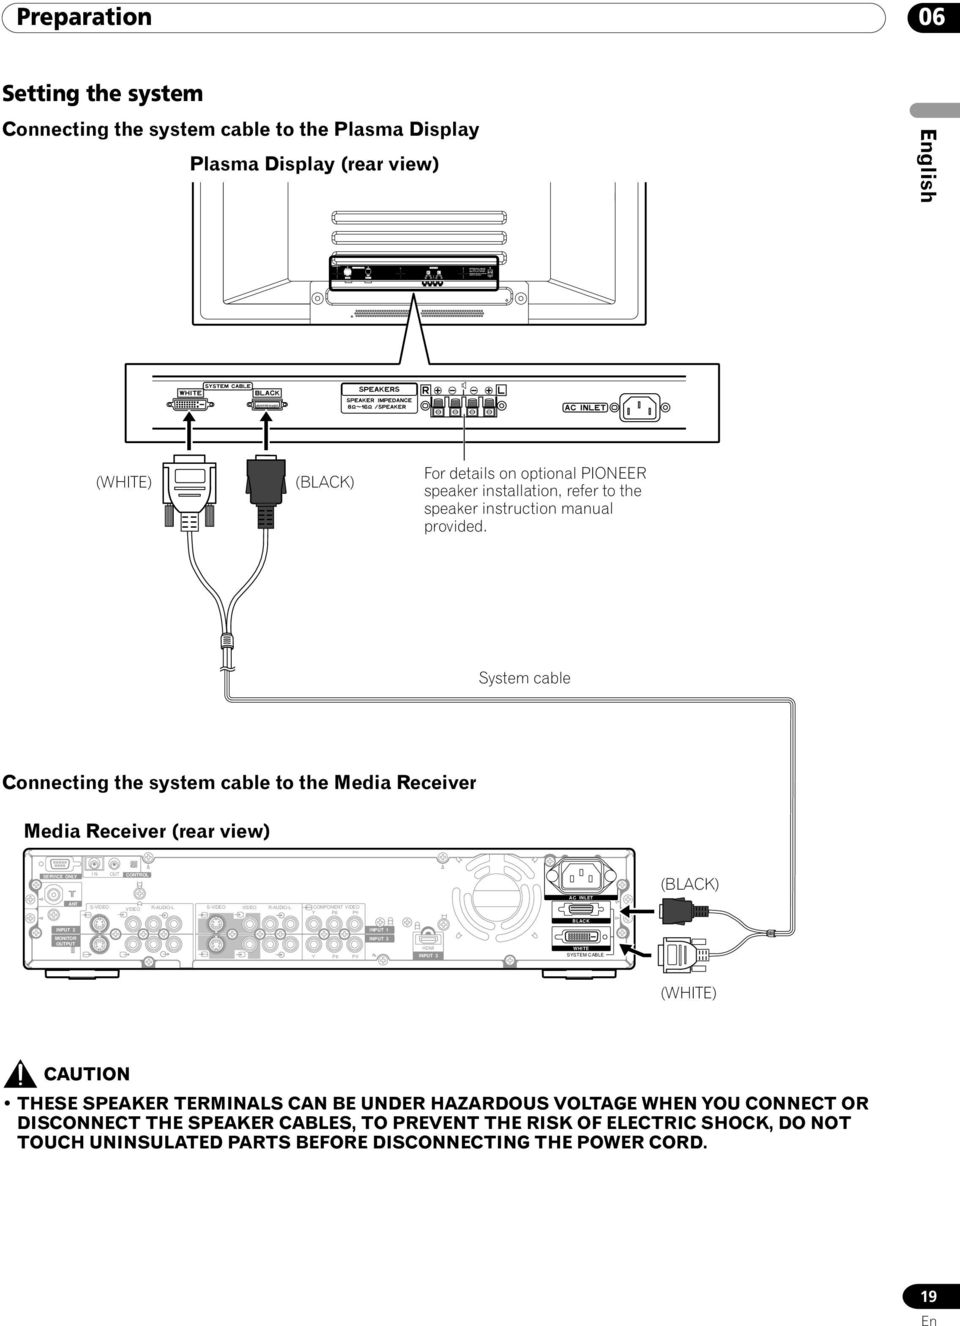 System cable Connecting the system cable to the Media Receiver Media Receiver (rear view) SERVICE ONLY ANT I N OUT CONTROL S-VIDEO VIDEO R-AUDIO-L S-VIDEO VIDEO R-AUDIO-L COMPONENT VIDEO Y